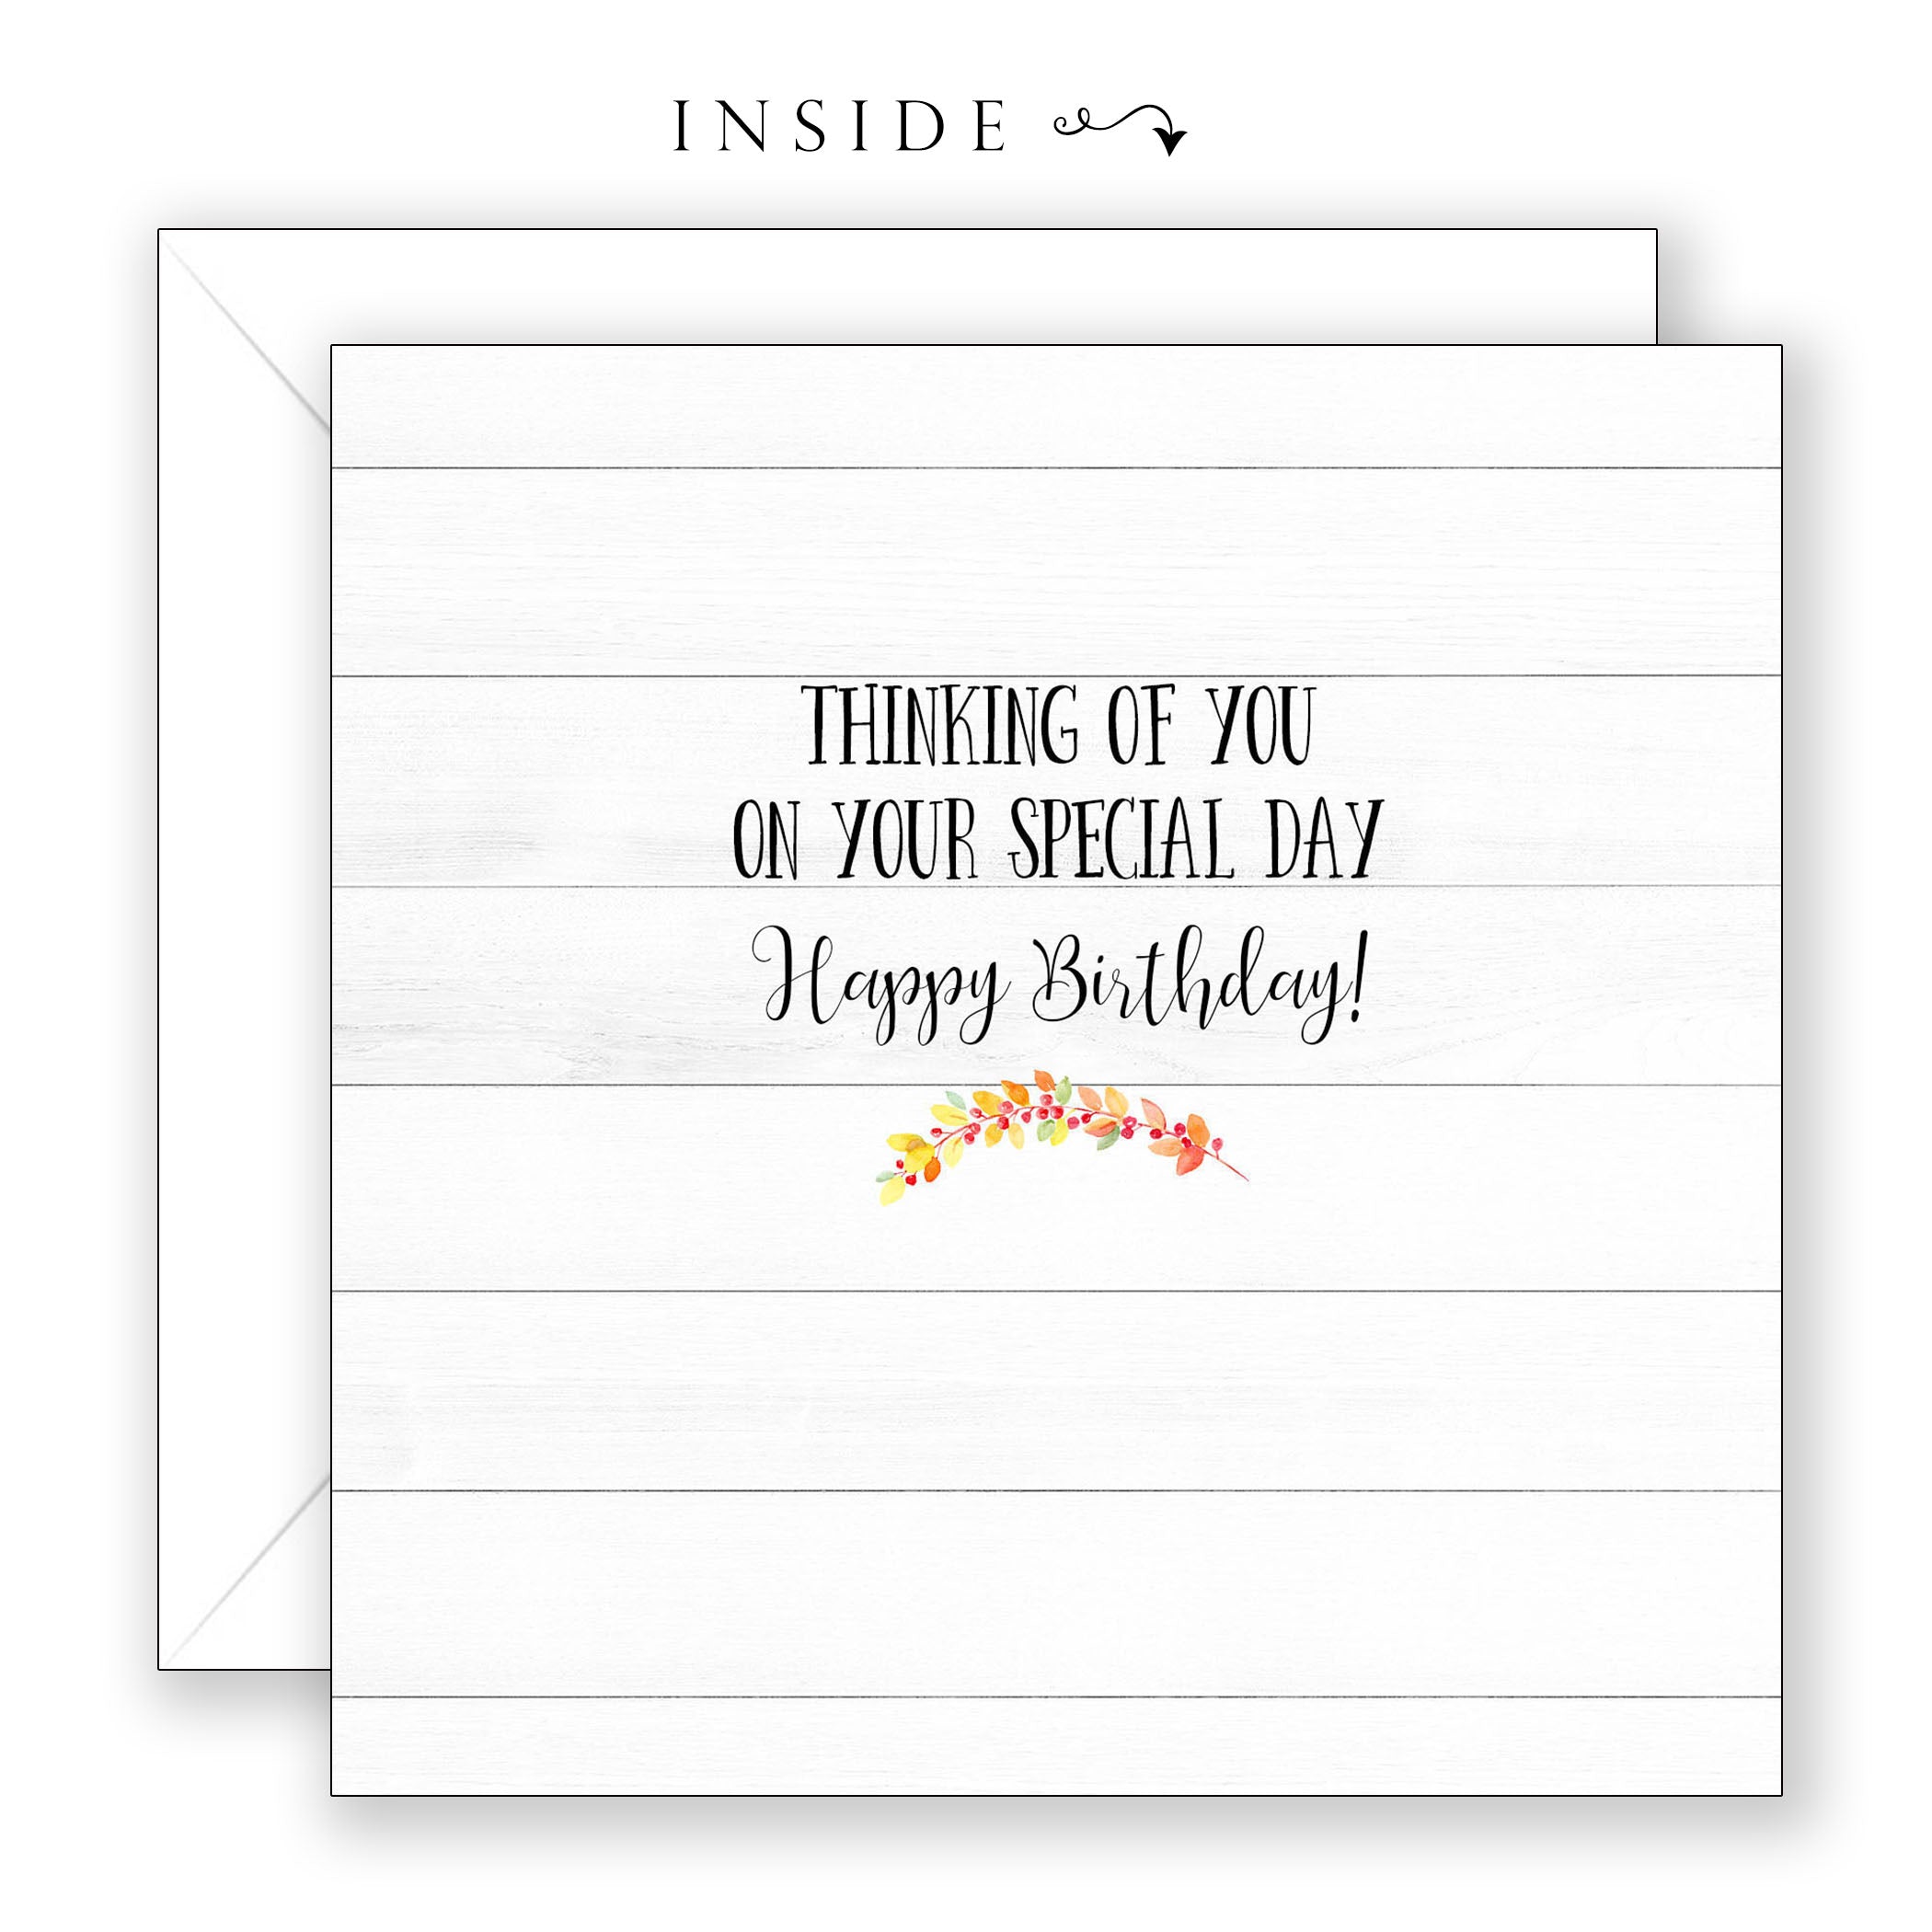 Bless You (Psalm 134:3) - Birthday Card